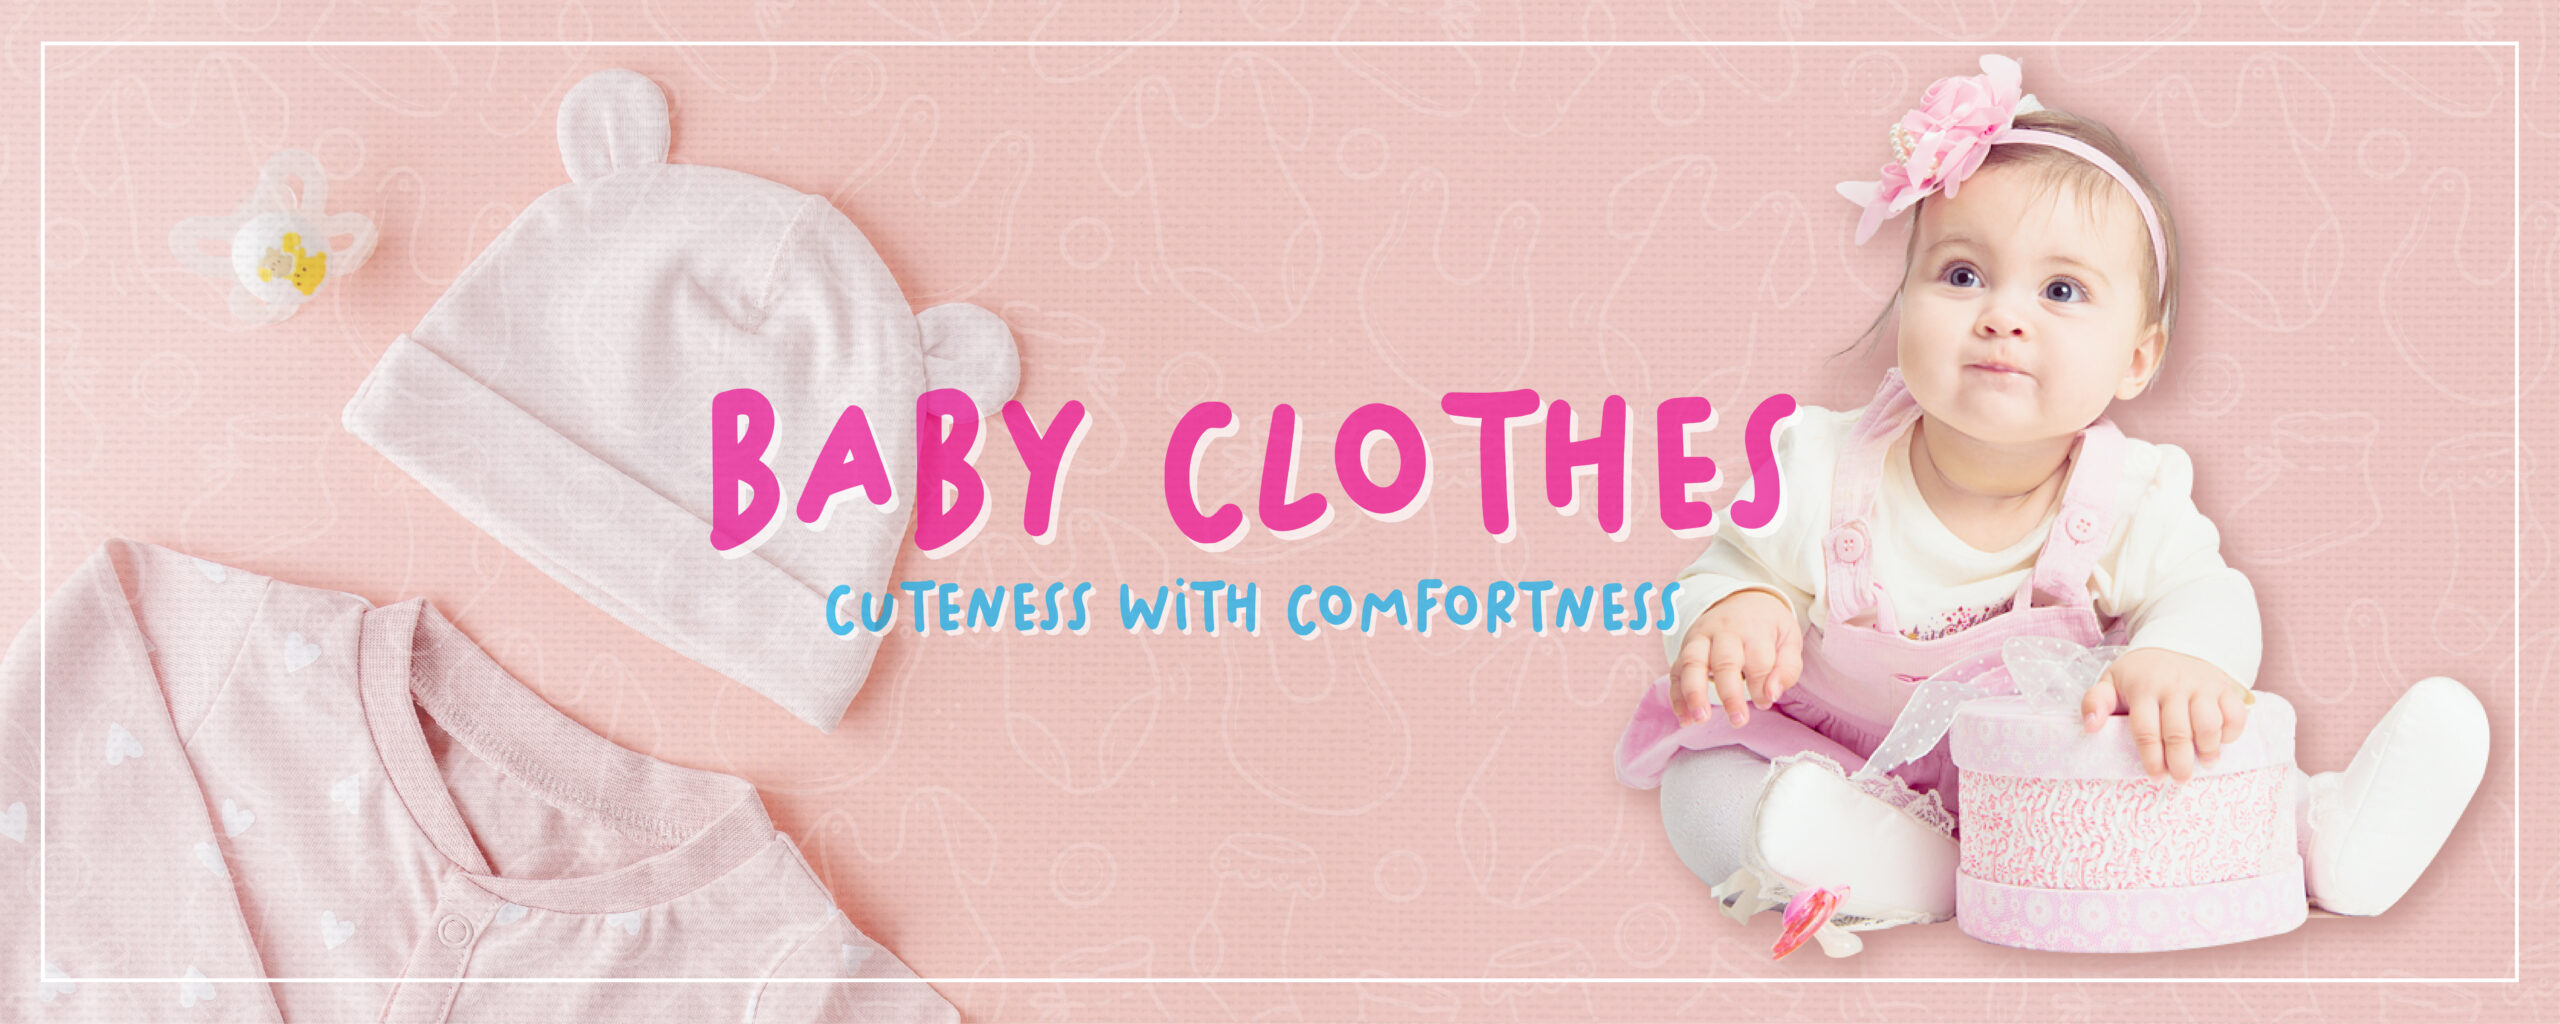 Baby Products Online India, Newborn Baby Products & Kids Online Shopping